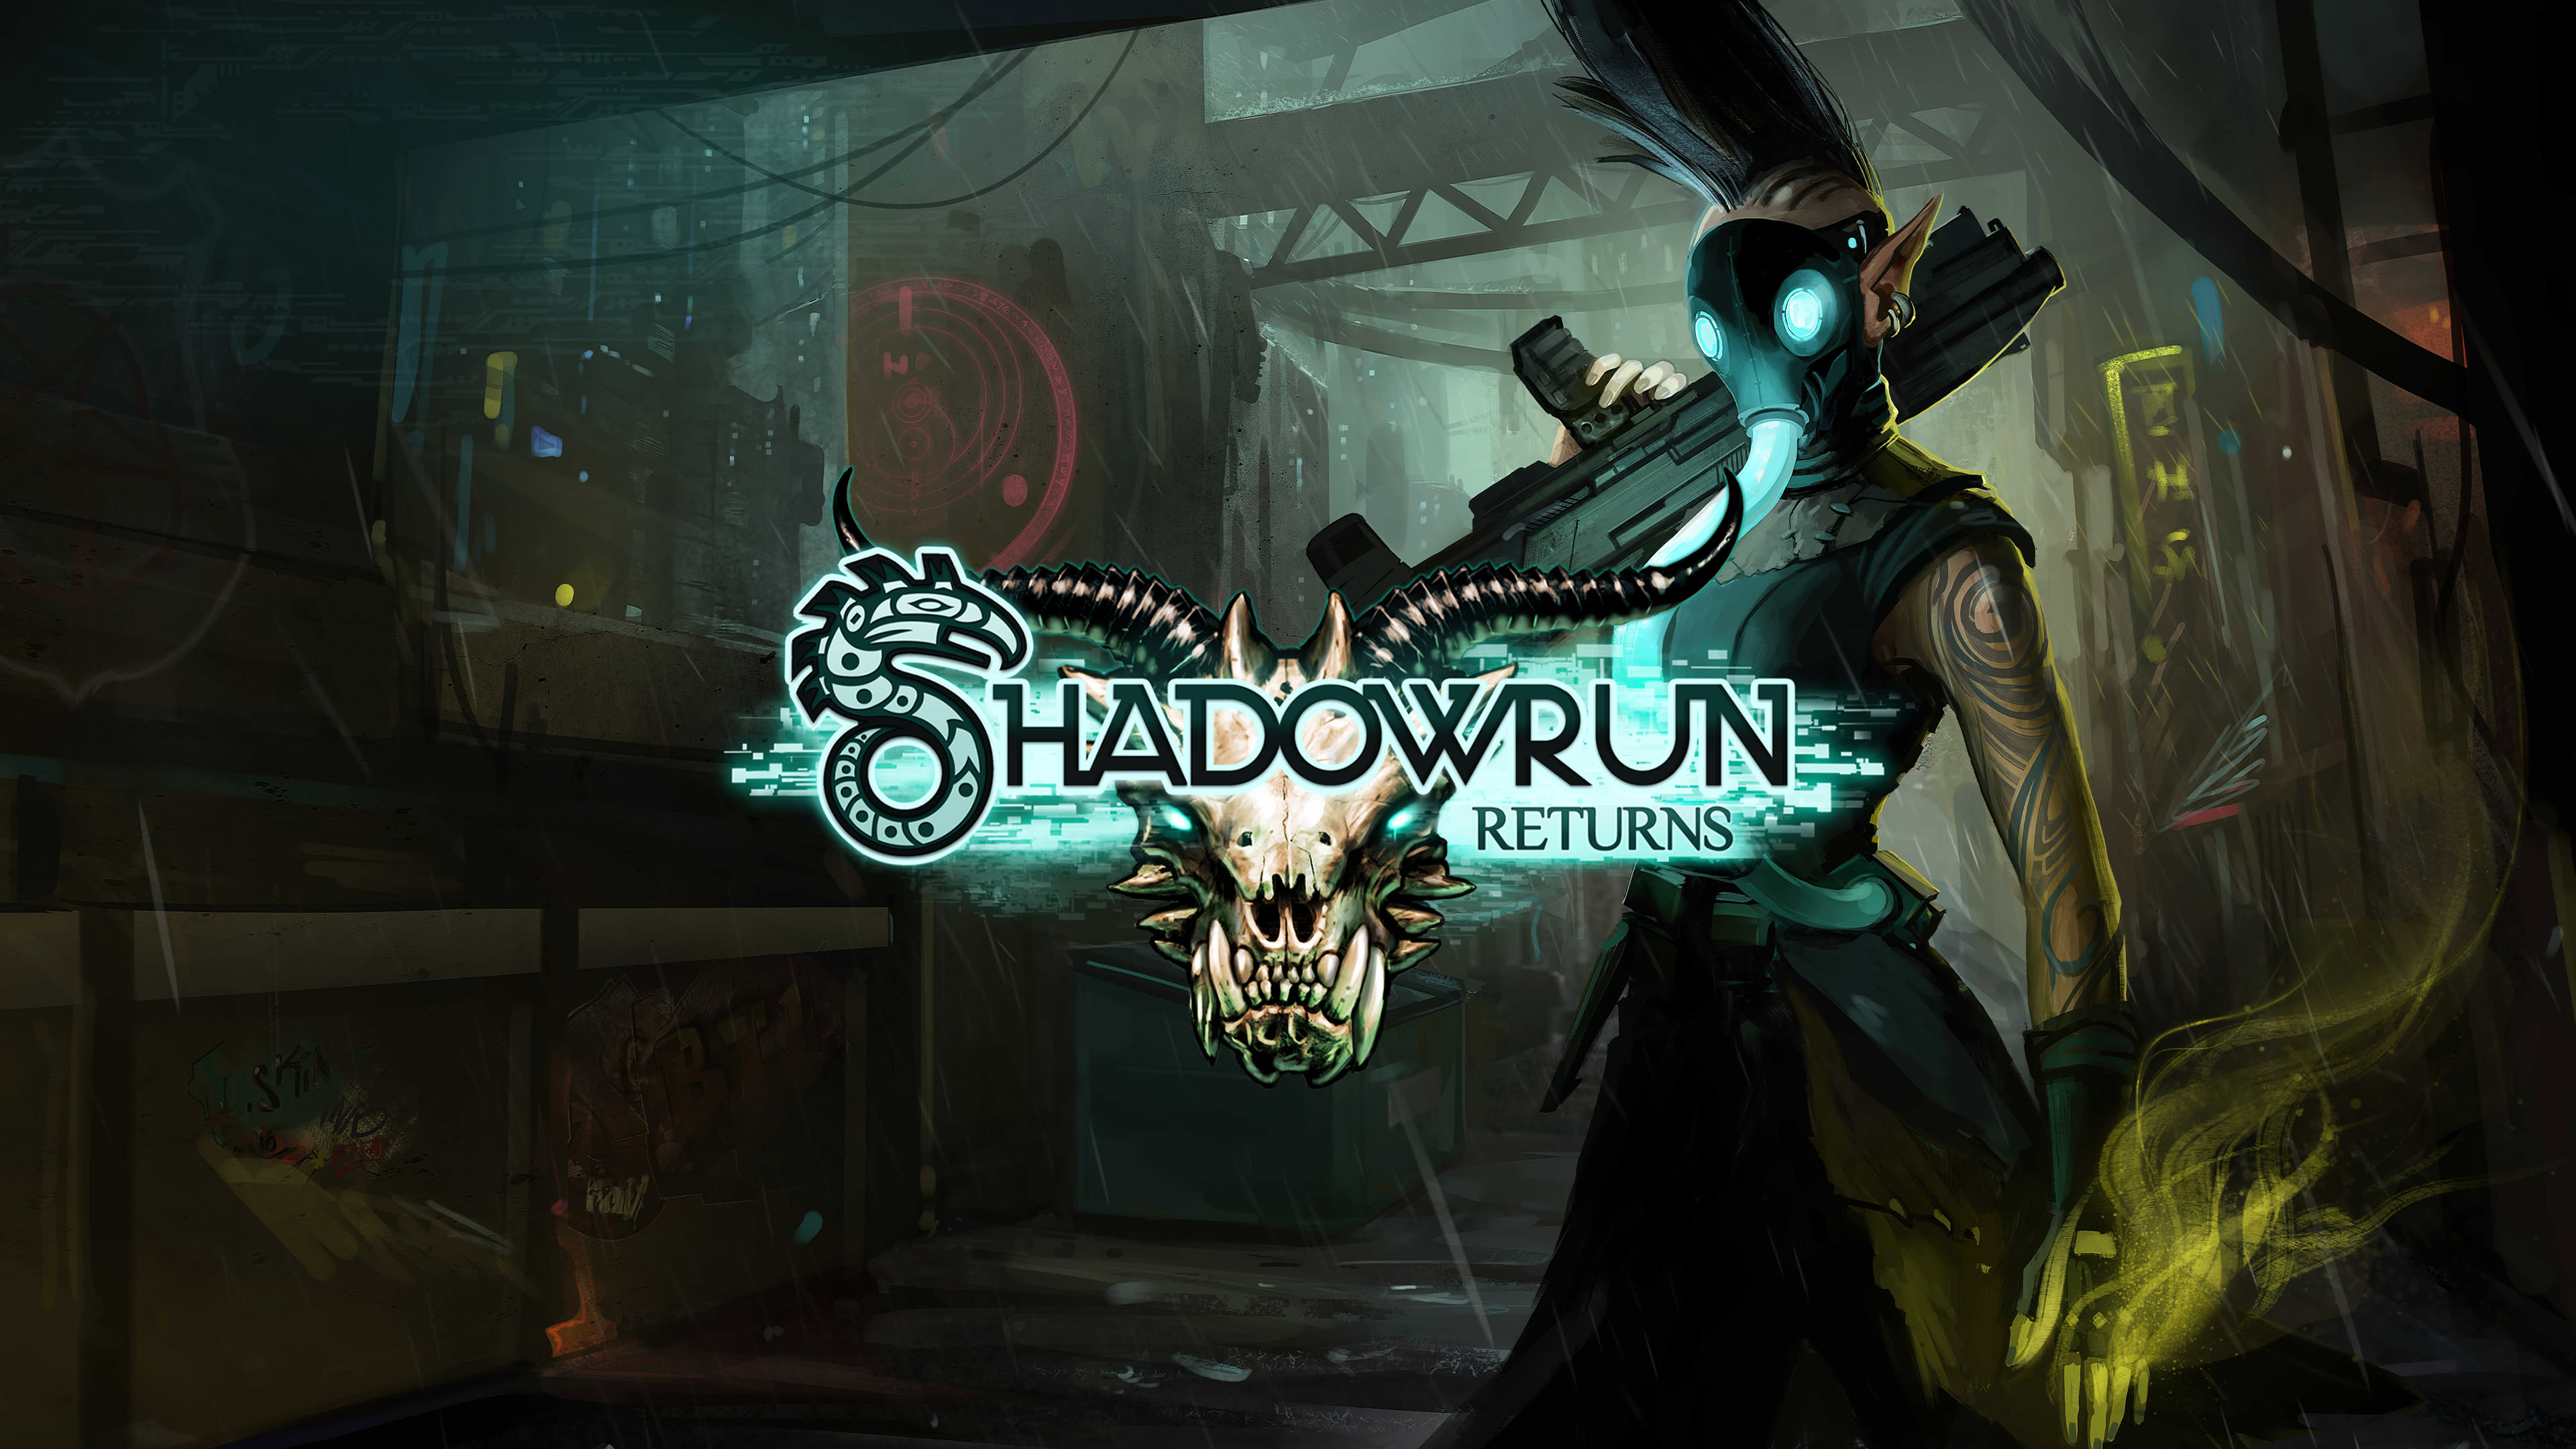 The Complete List of Shadowrun Games in Chronological & Release